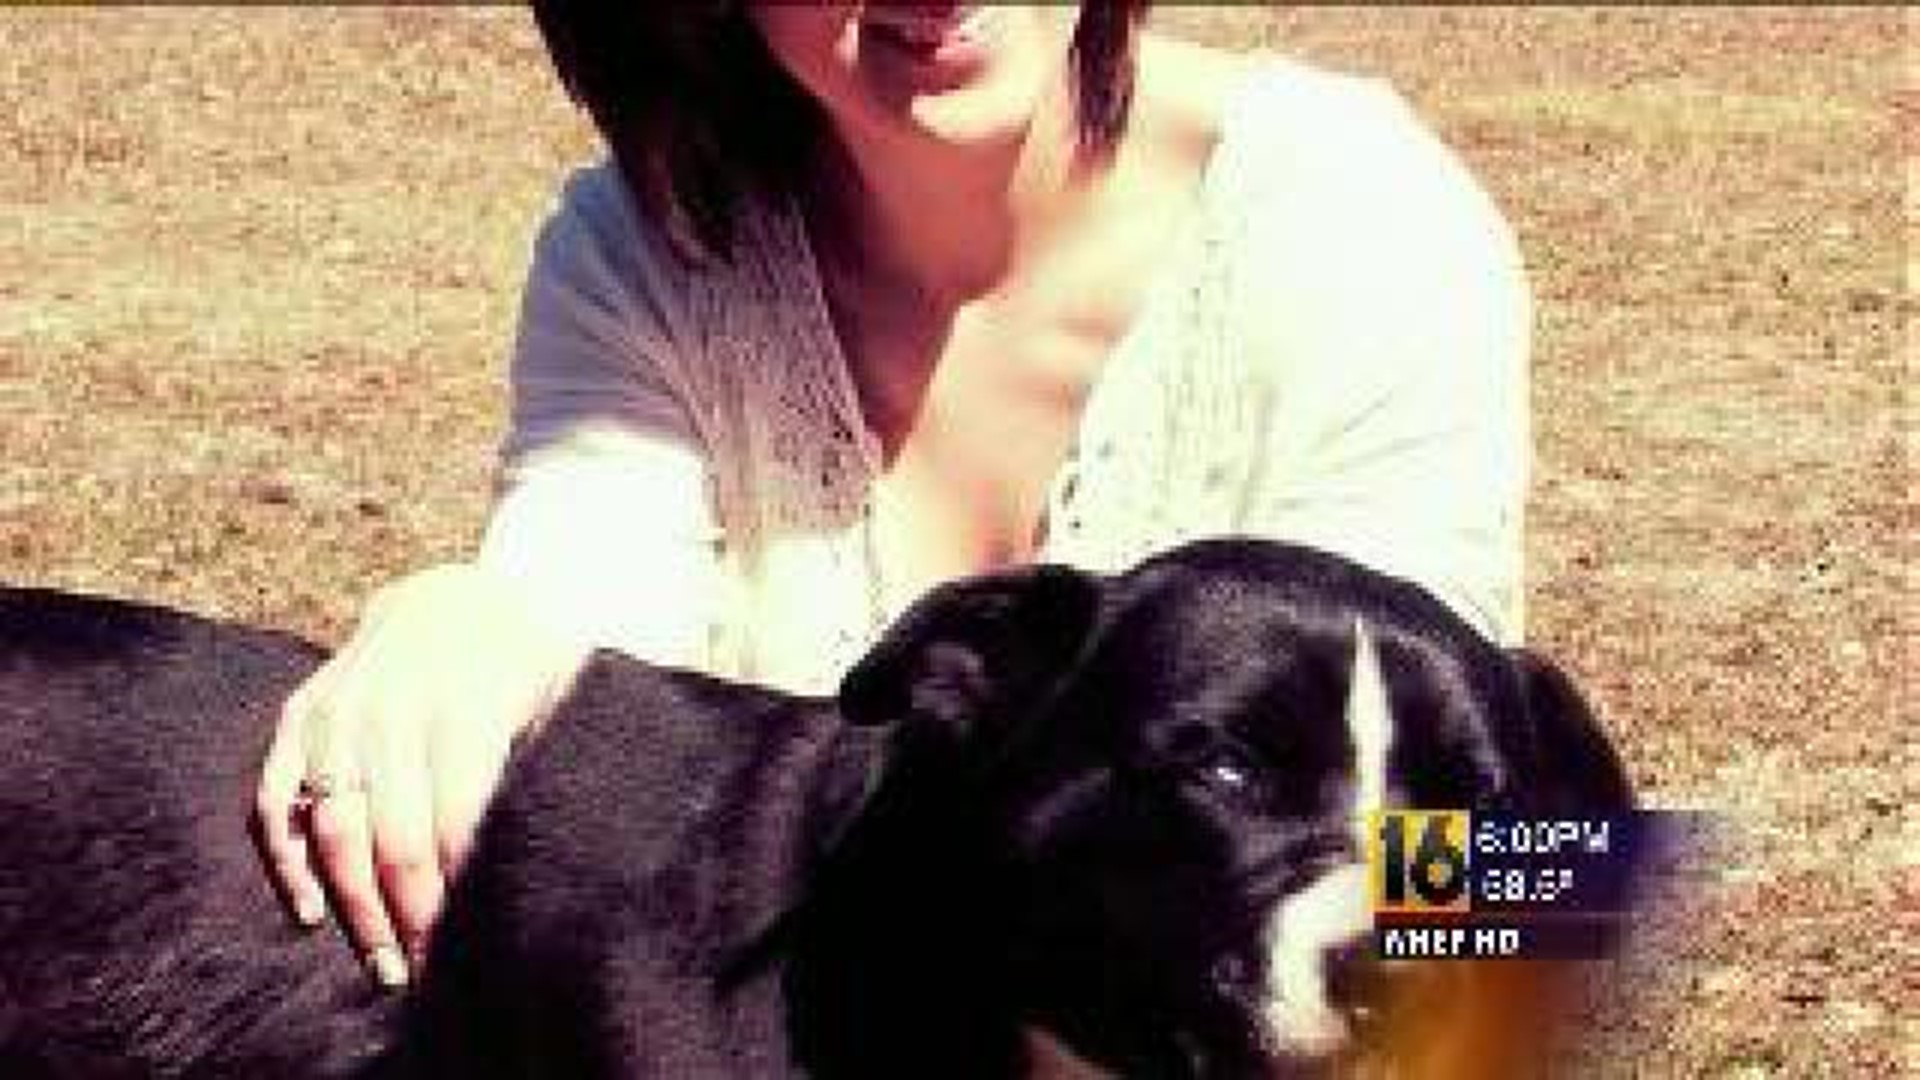 Man Faces No Charges for Shooting Dog